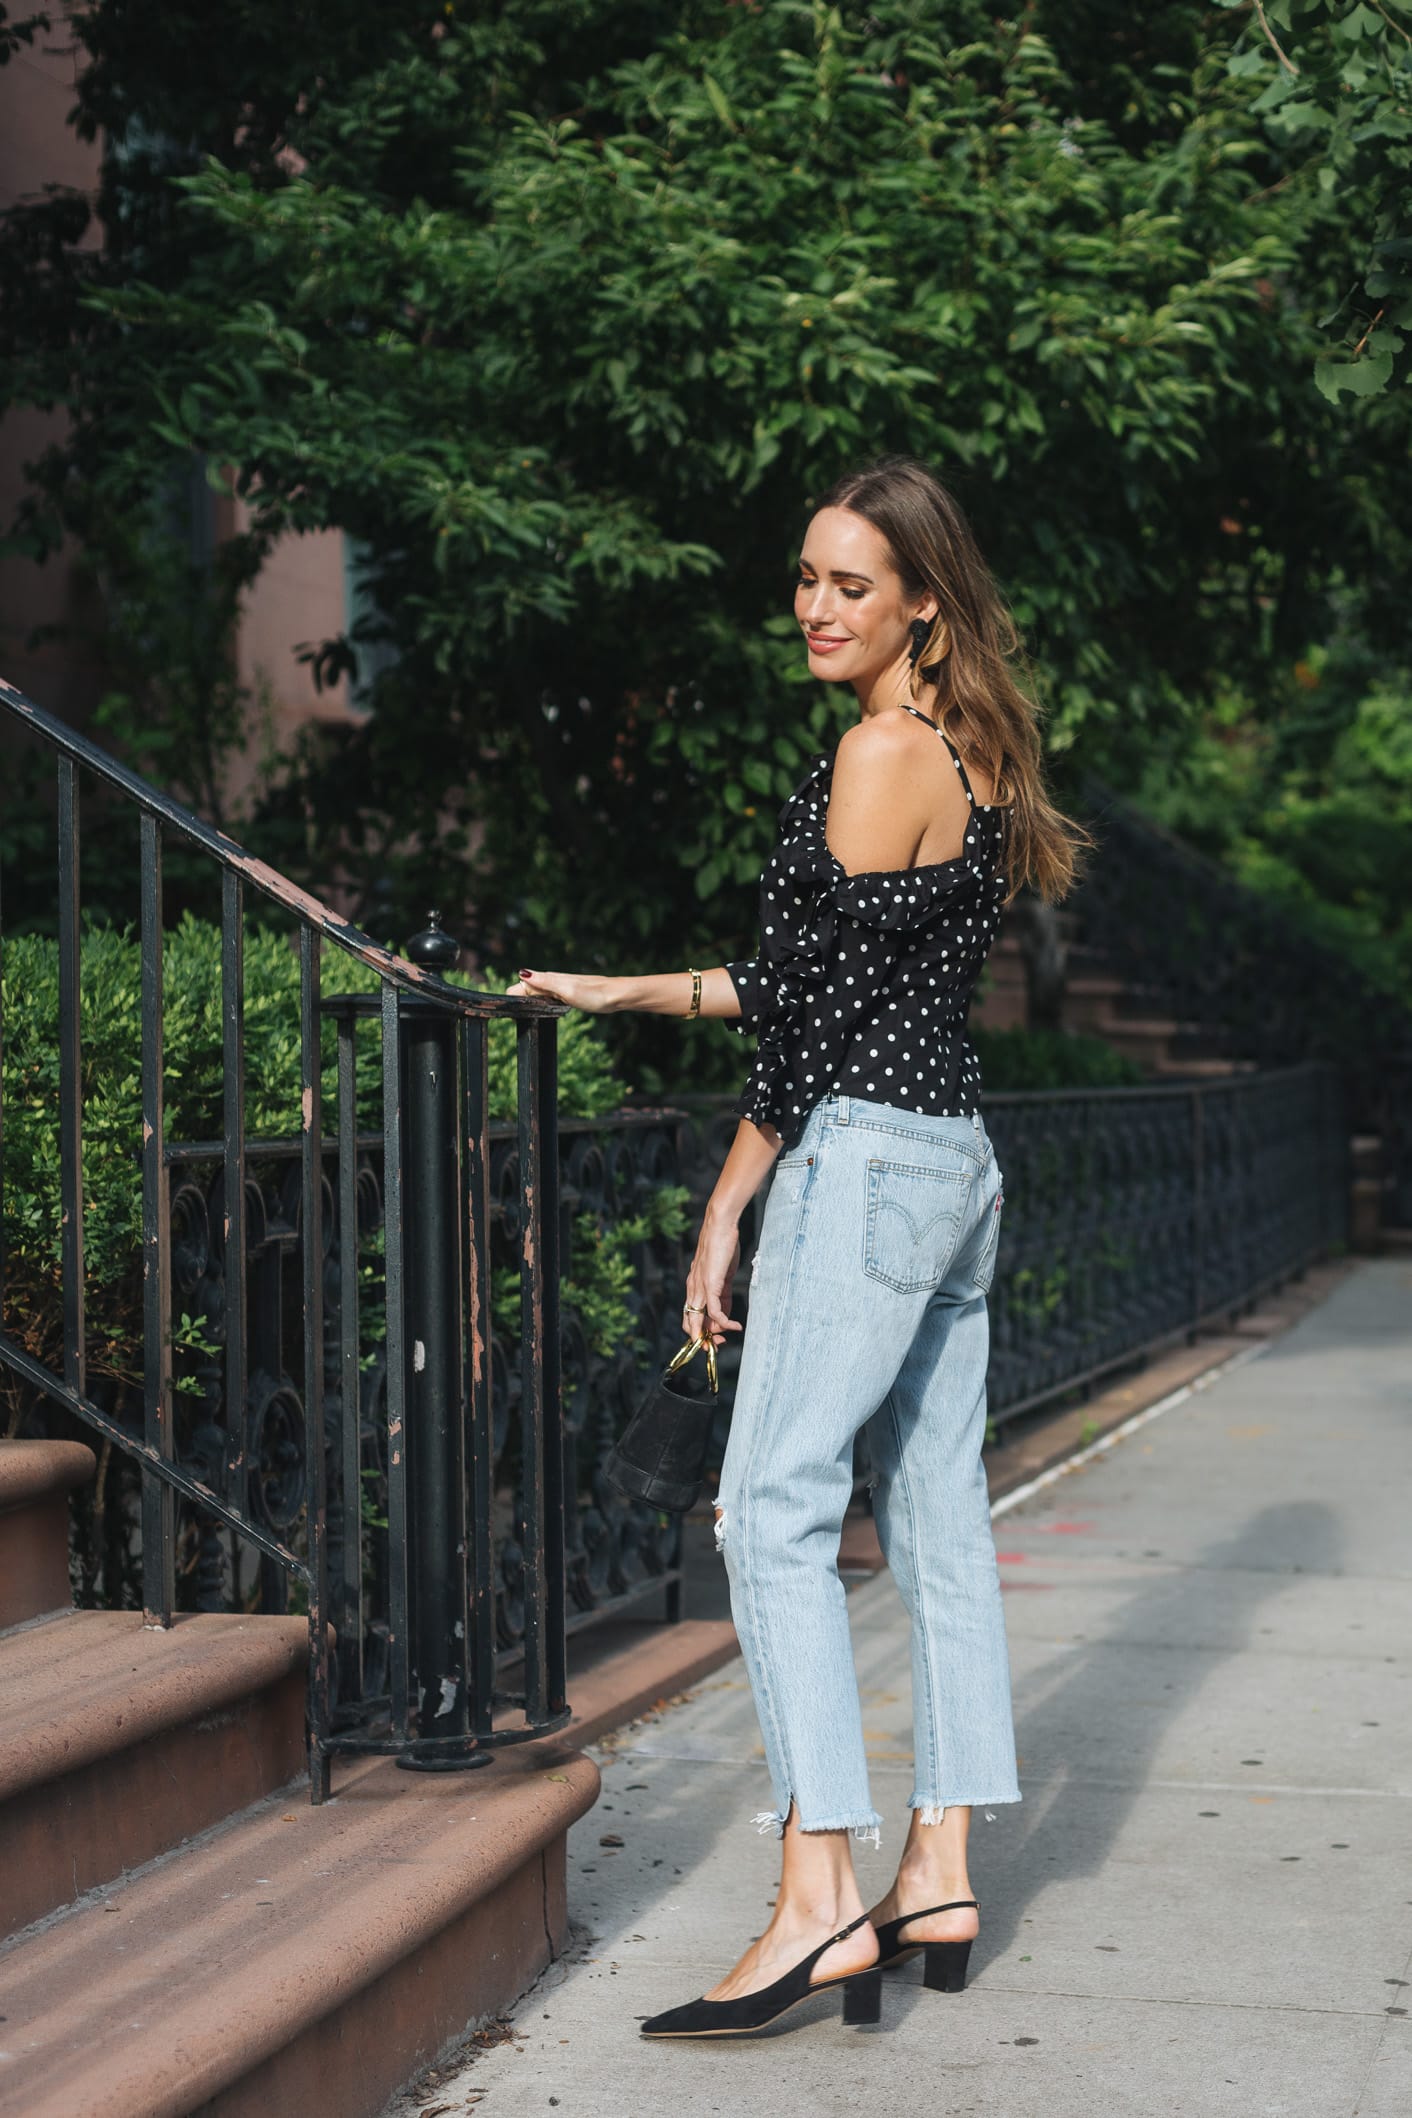 How To Style My Favorite 90s Trends - Front Roe by Louise Roe